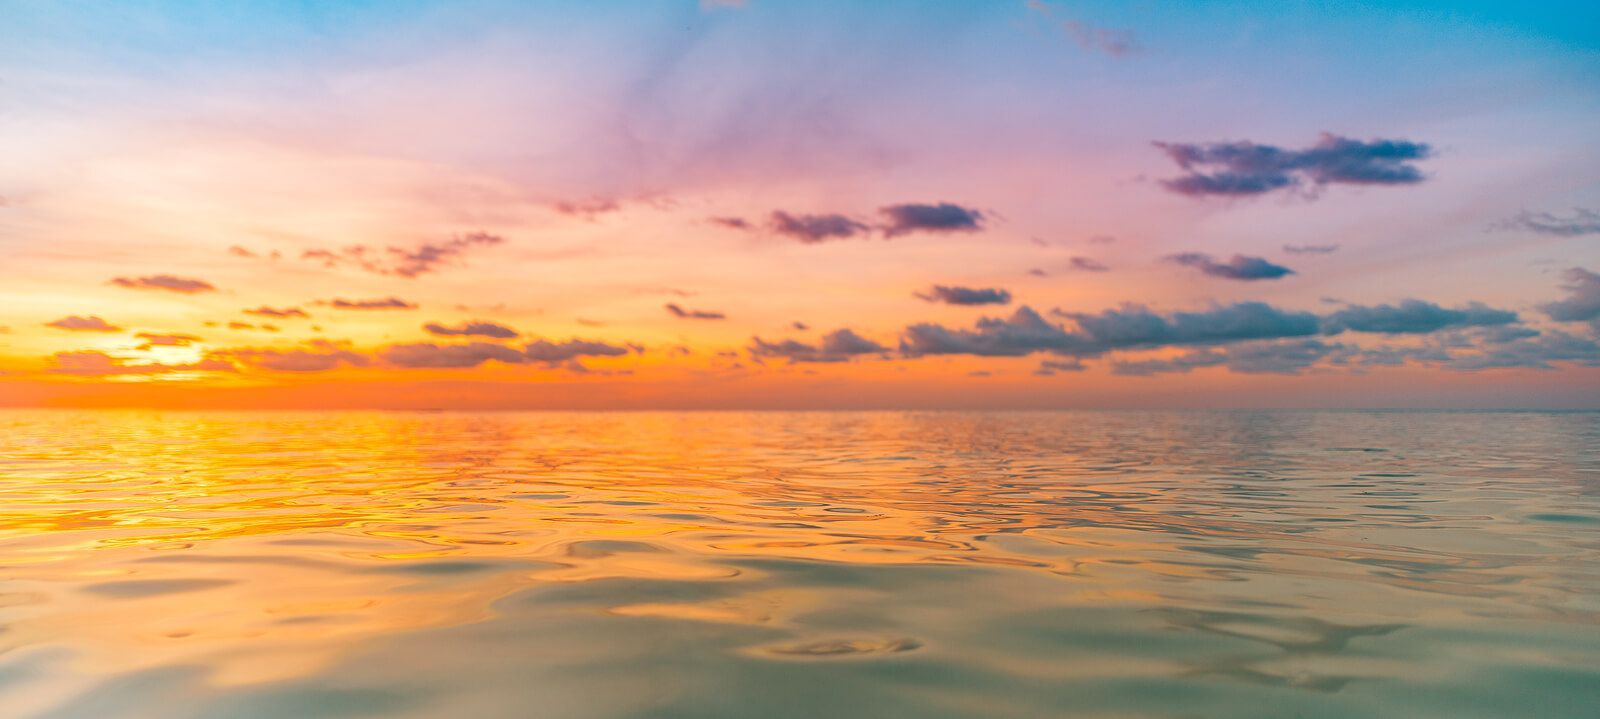 A beautiful sunset over the ocean. Couples retreat  in Orlando, FL can help your reconnect with your partner. Intimacy workshops and couples retreats in Florida, Georgia, North Carolina and beyond.